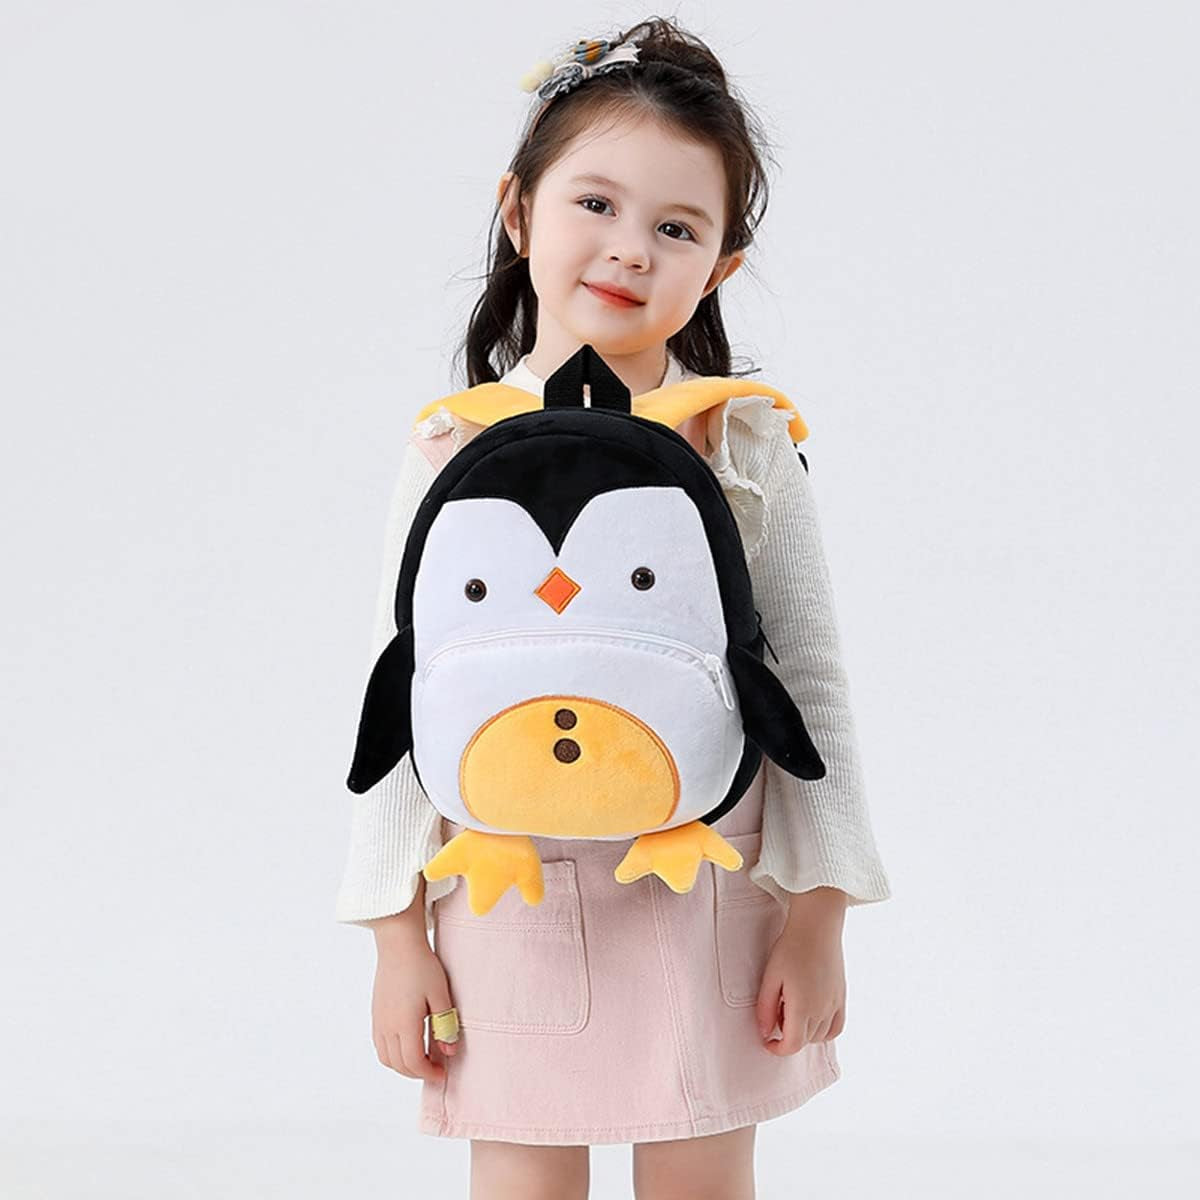 Toddler Backpack for Boys and Girls, Cute Soft Plush Animal Cartoon Mini Backpack Little for Kids 2-6 Years (Cat Brown)